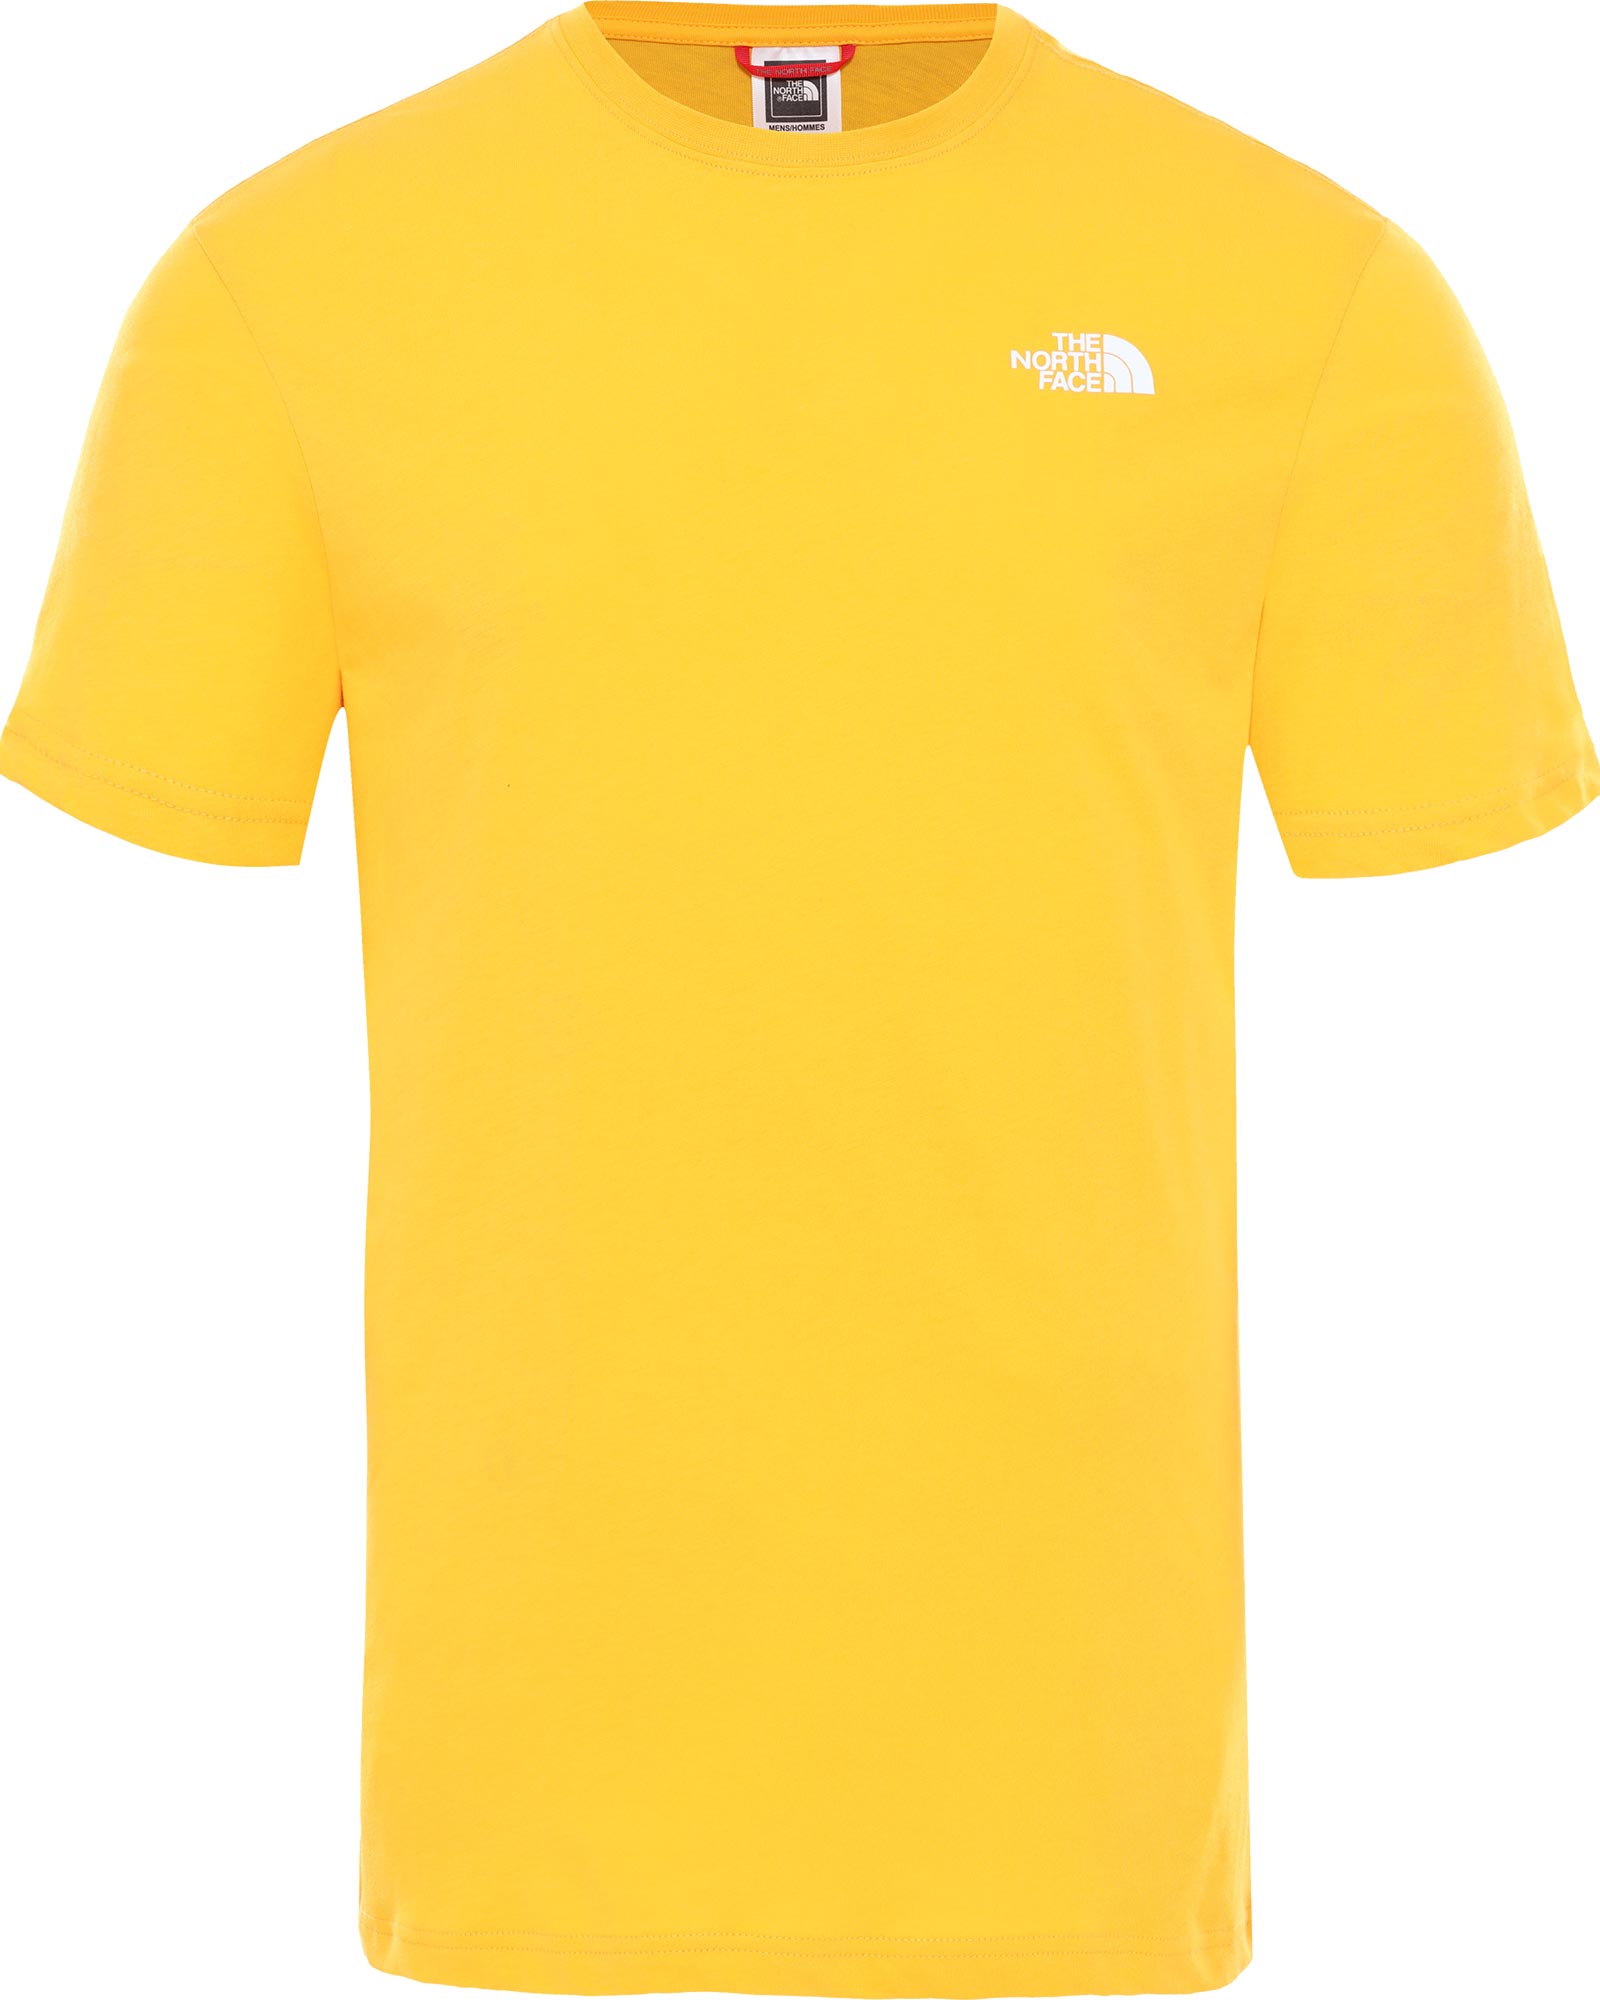 The North Face Red Box Men’s T Shirt - Summit Gold XXL